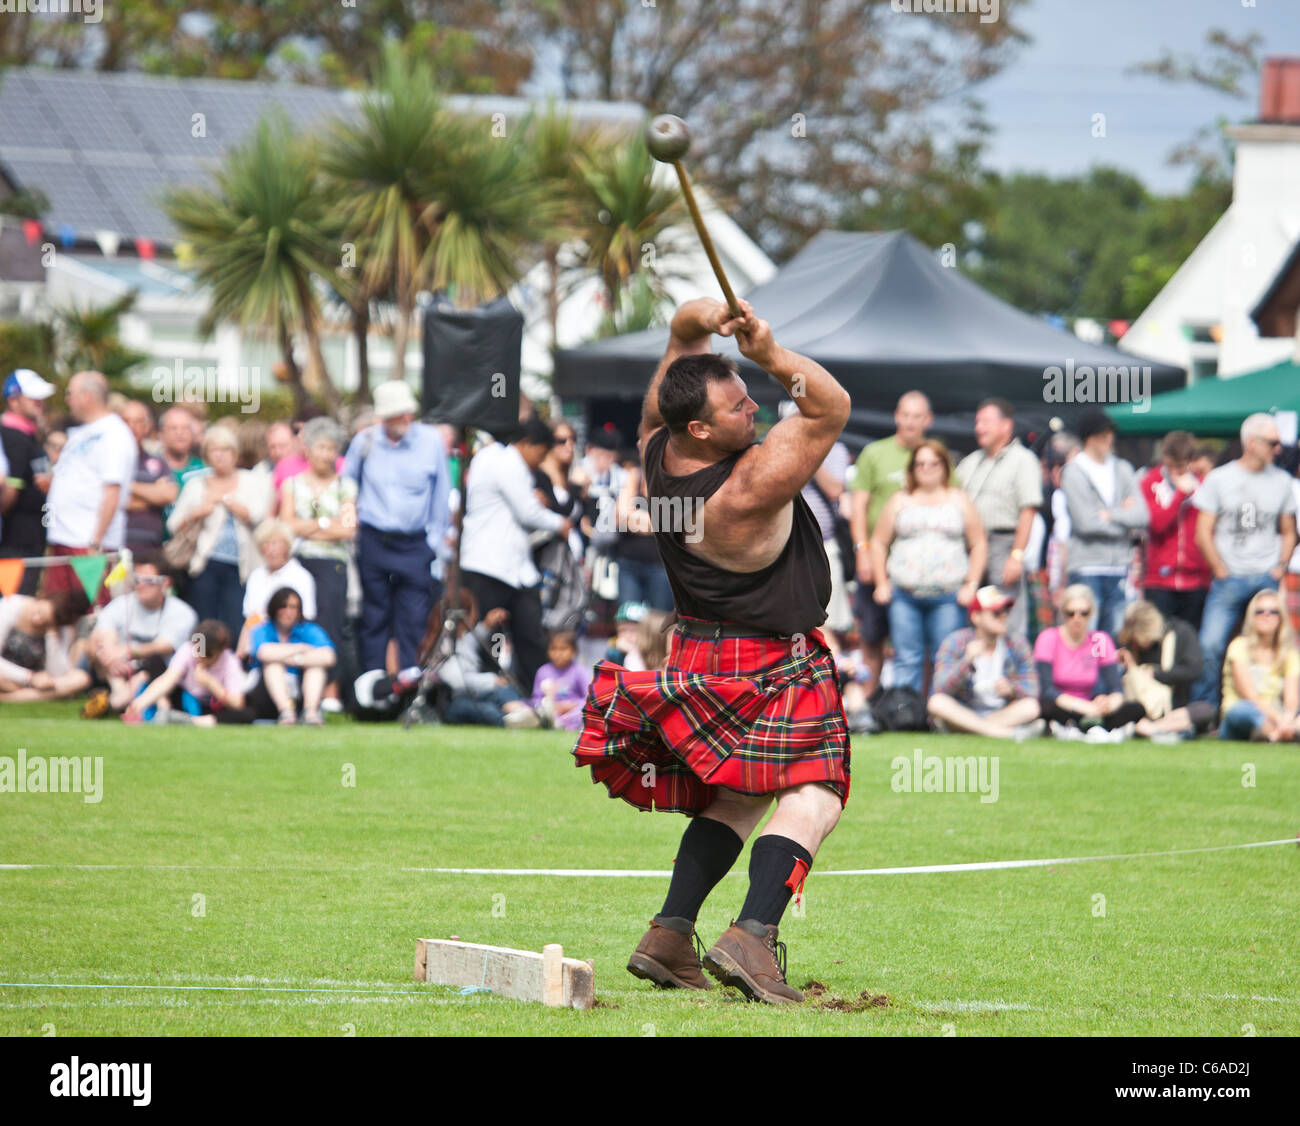 Competitor competing in a Hammer Throwing Competition (Scottish Standing Style) at Brodick Highland Games, Isle of Arran Stock Photo